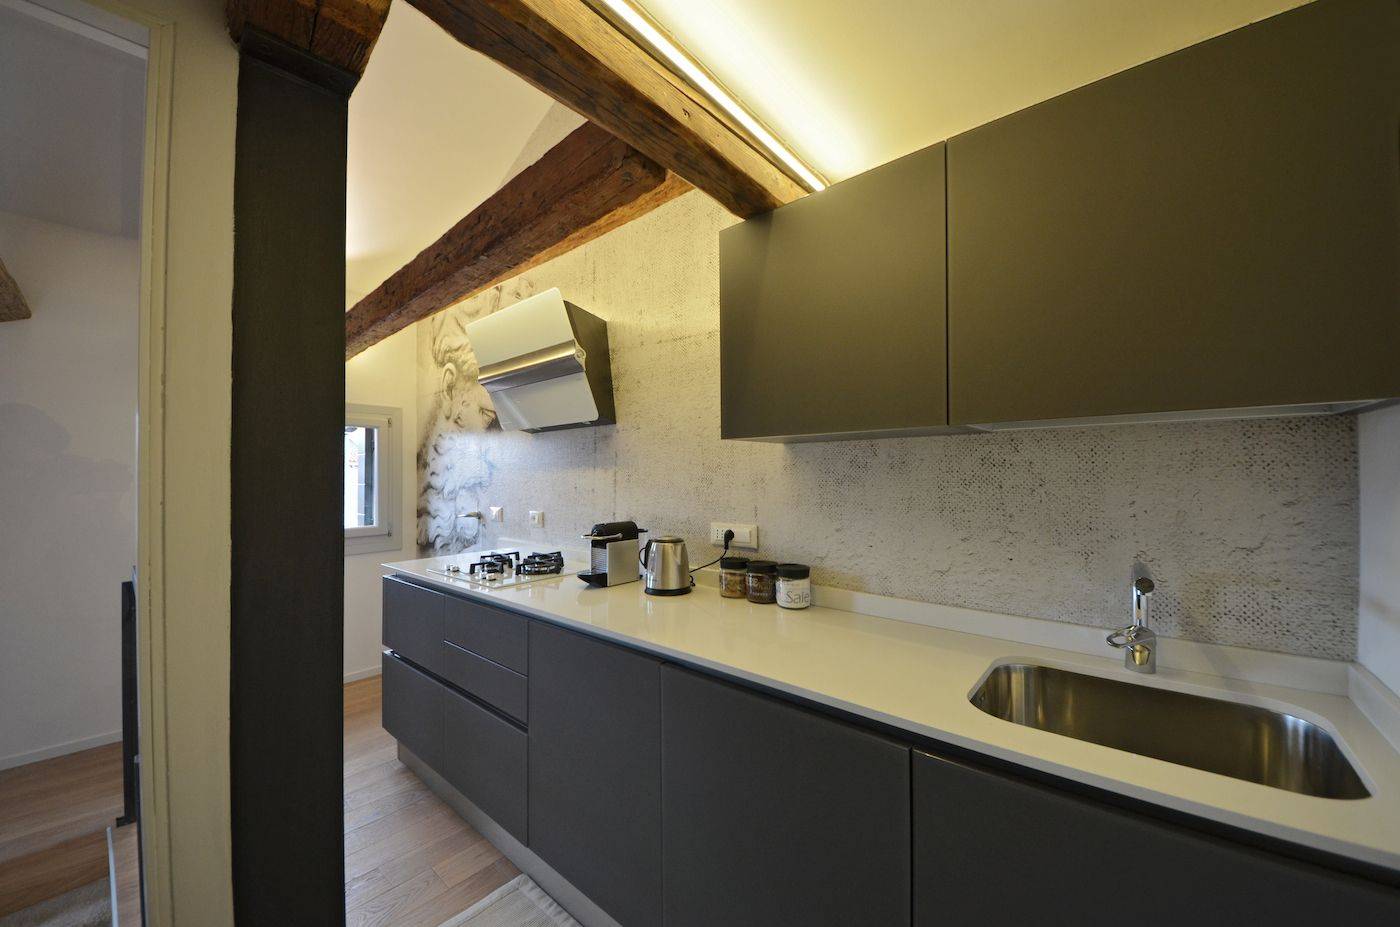 the stylish and well equipped kitchen is really functional